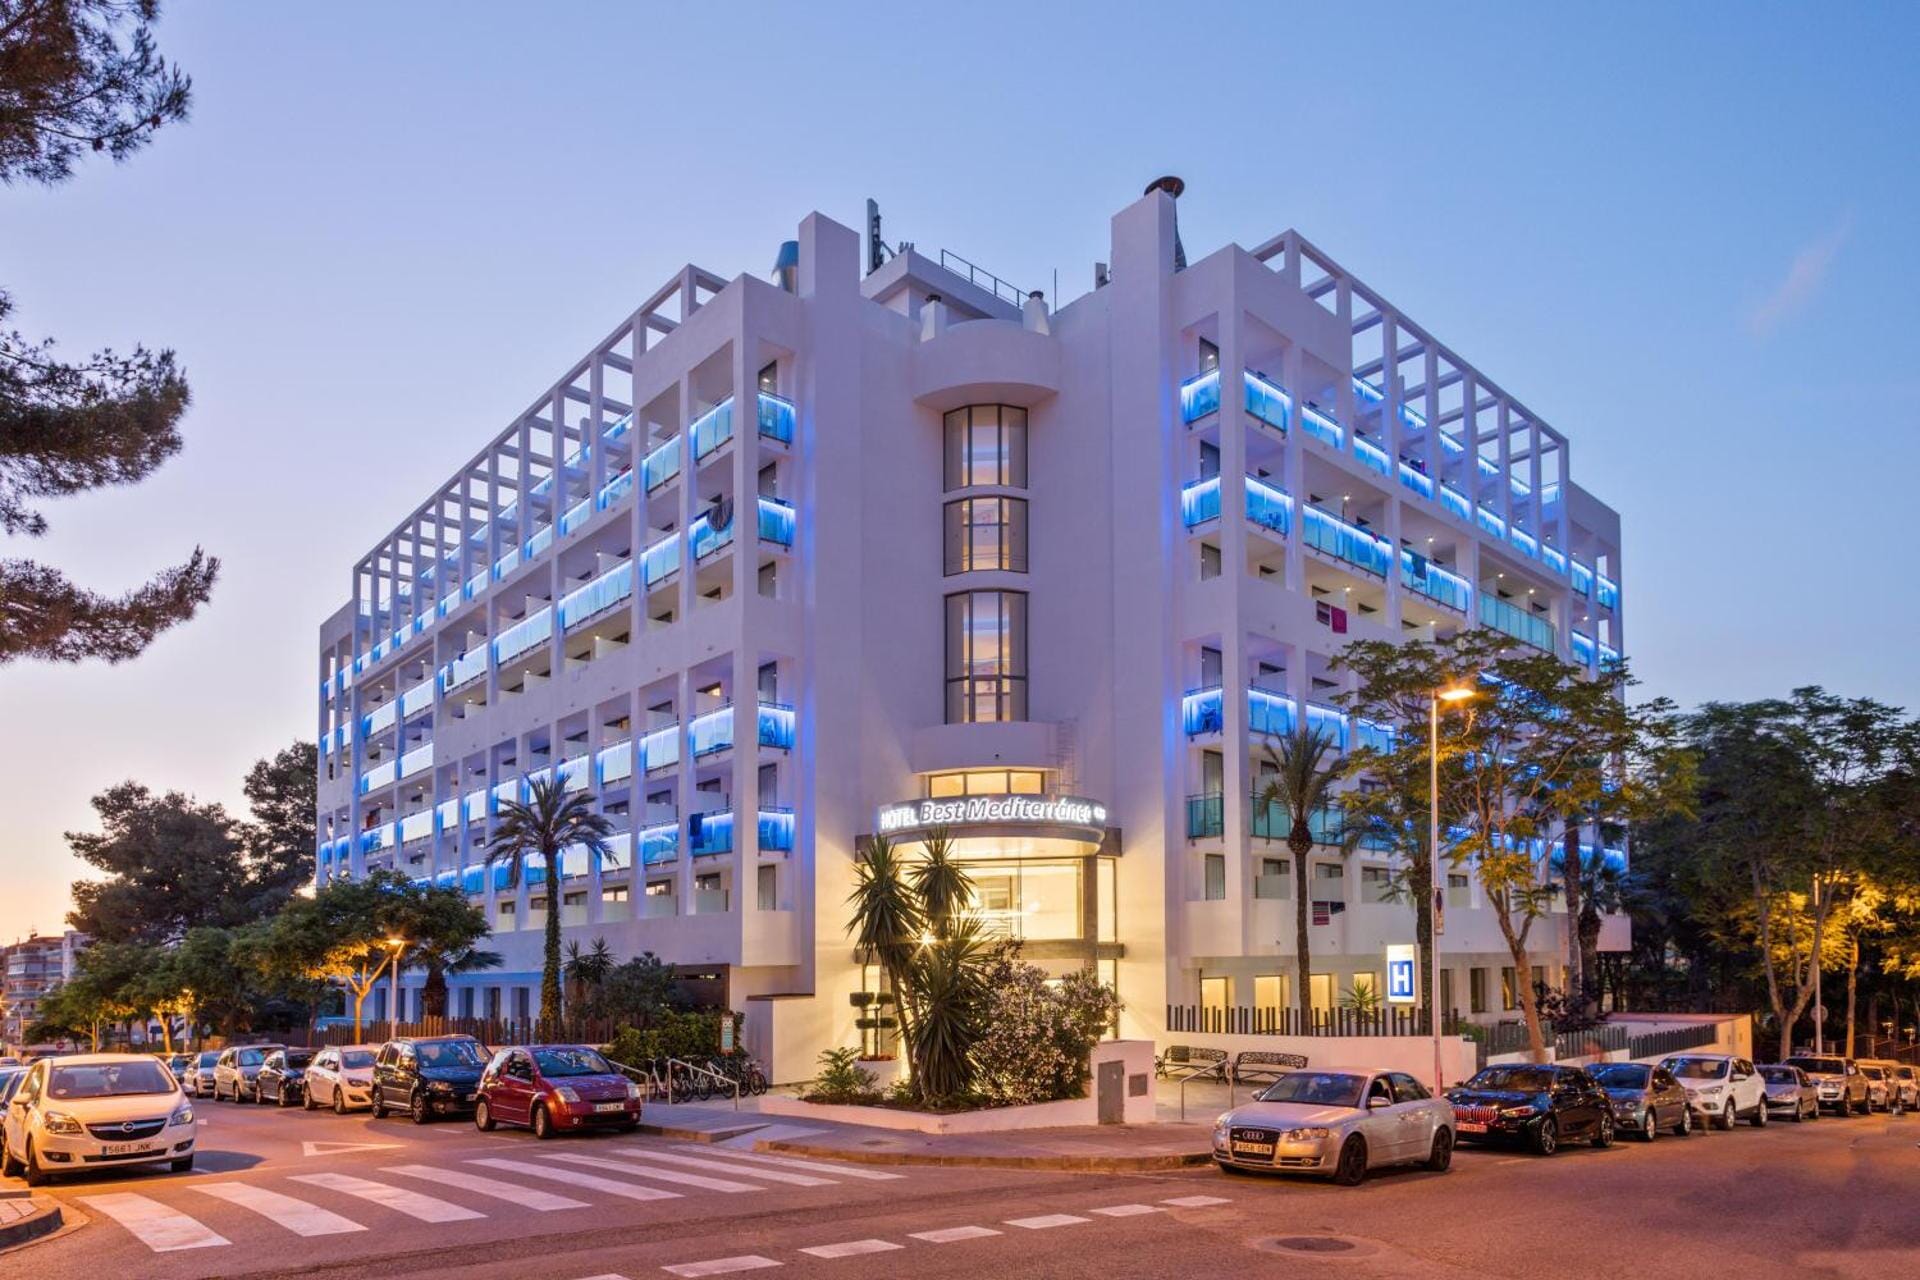 Hotel Best Mediterraneo: A Luxurious Stay in the Heart of Salou